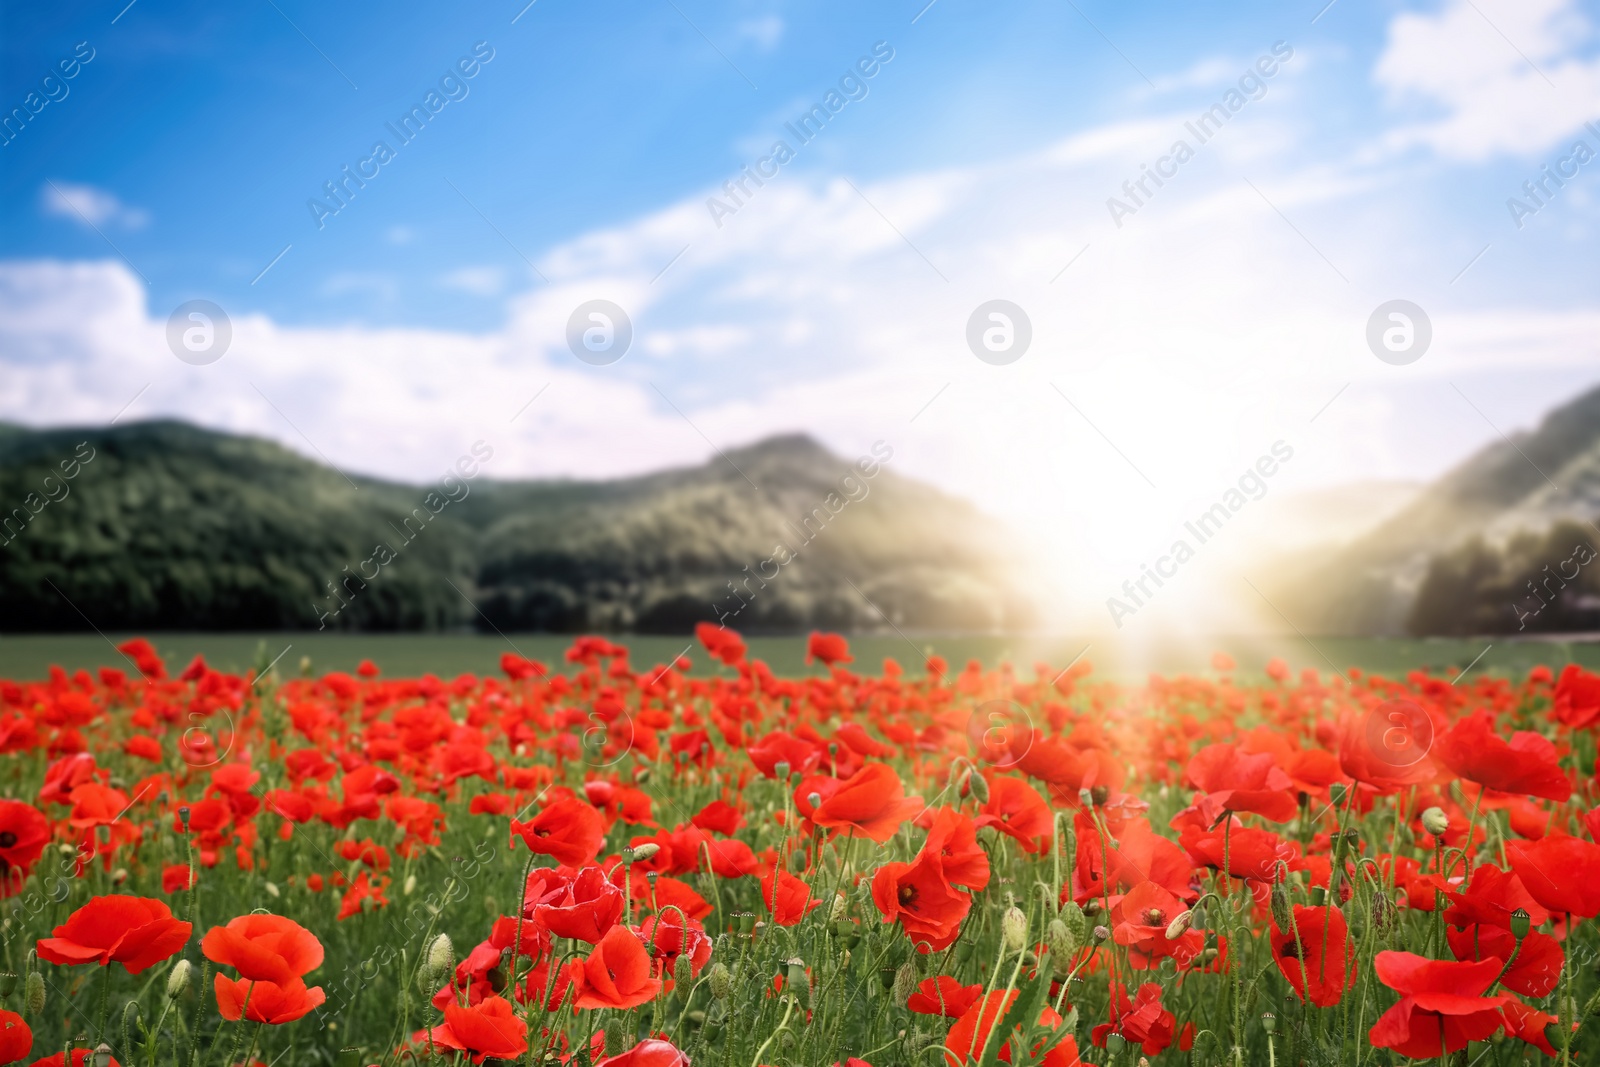 Image of Sunlit field of red poppy flowers near mountains